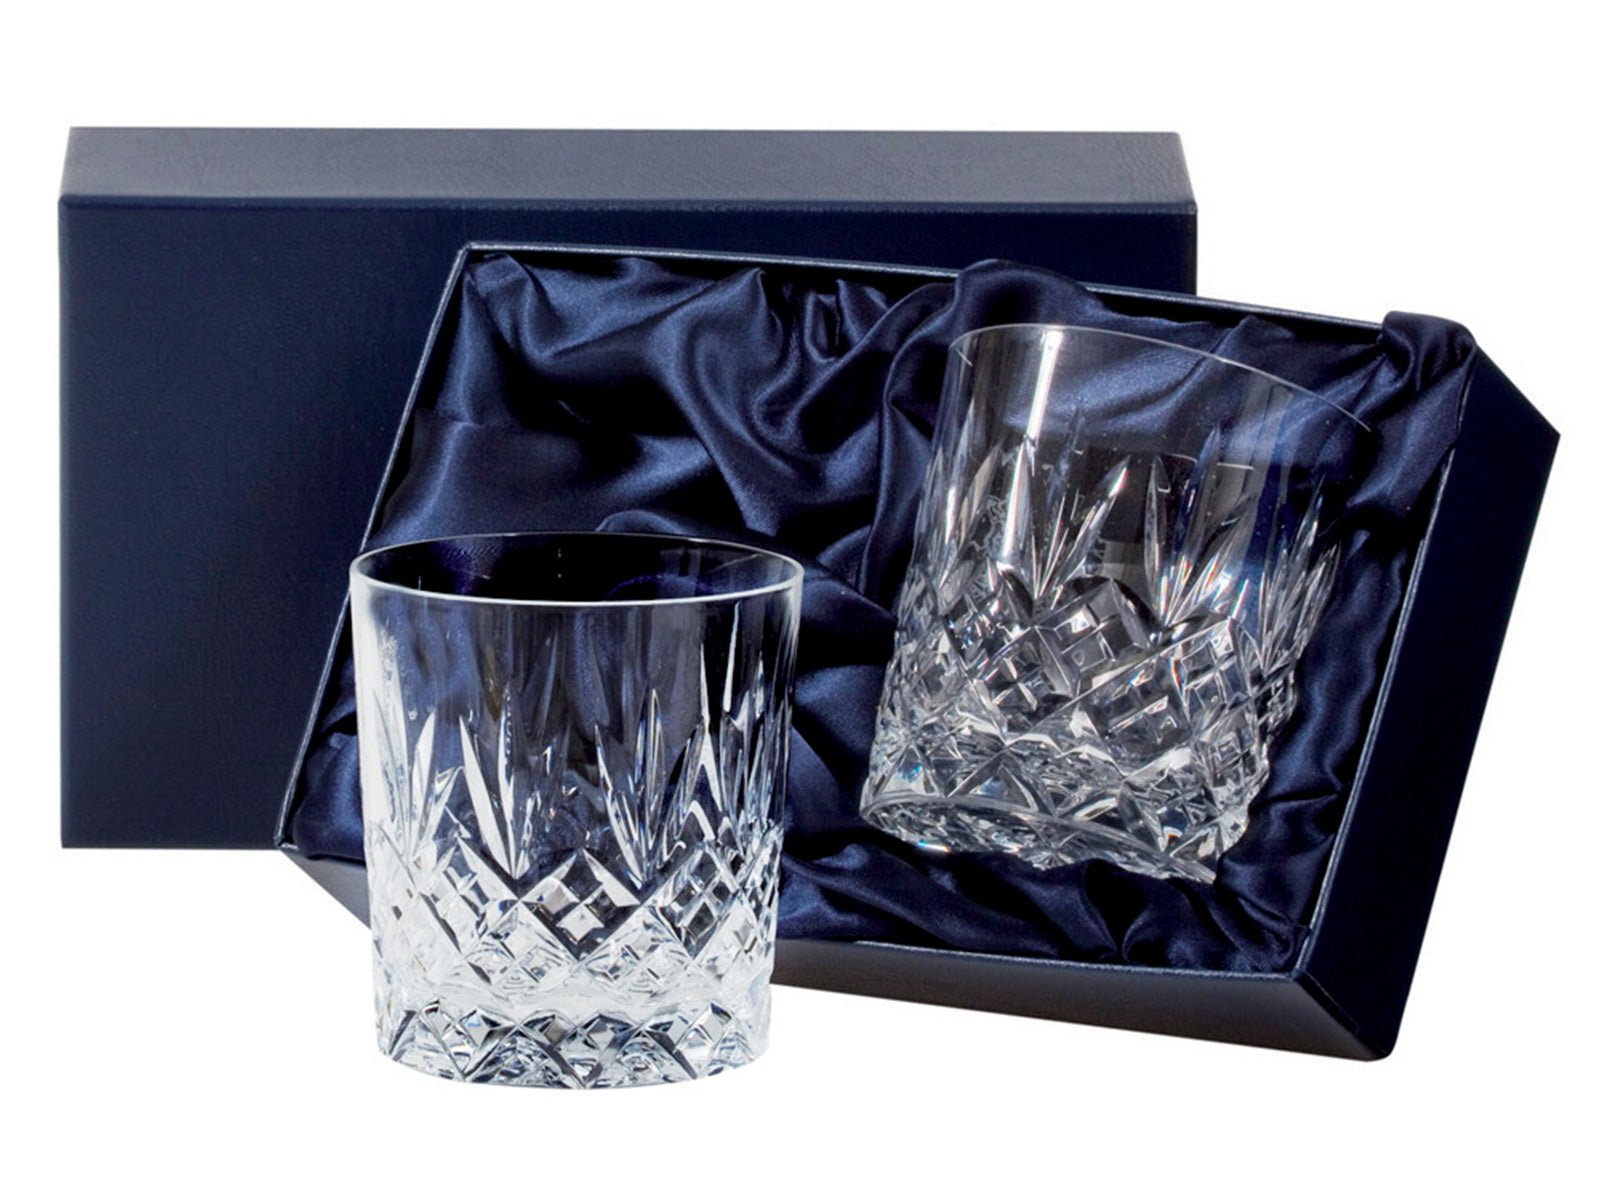 Royal Scot Crystal Edinburgh Tumblers - Large / Pair are hand-cut in Britain with the Edinburgh design, being straight and cylindrical in design and weighted on their bottom.